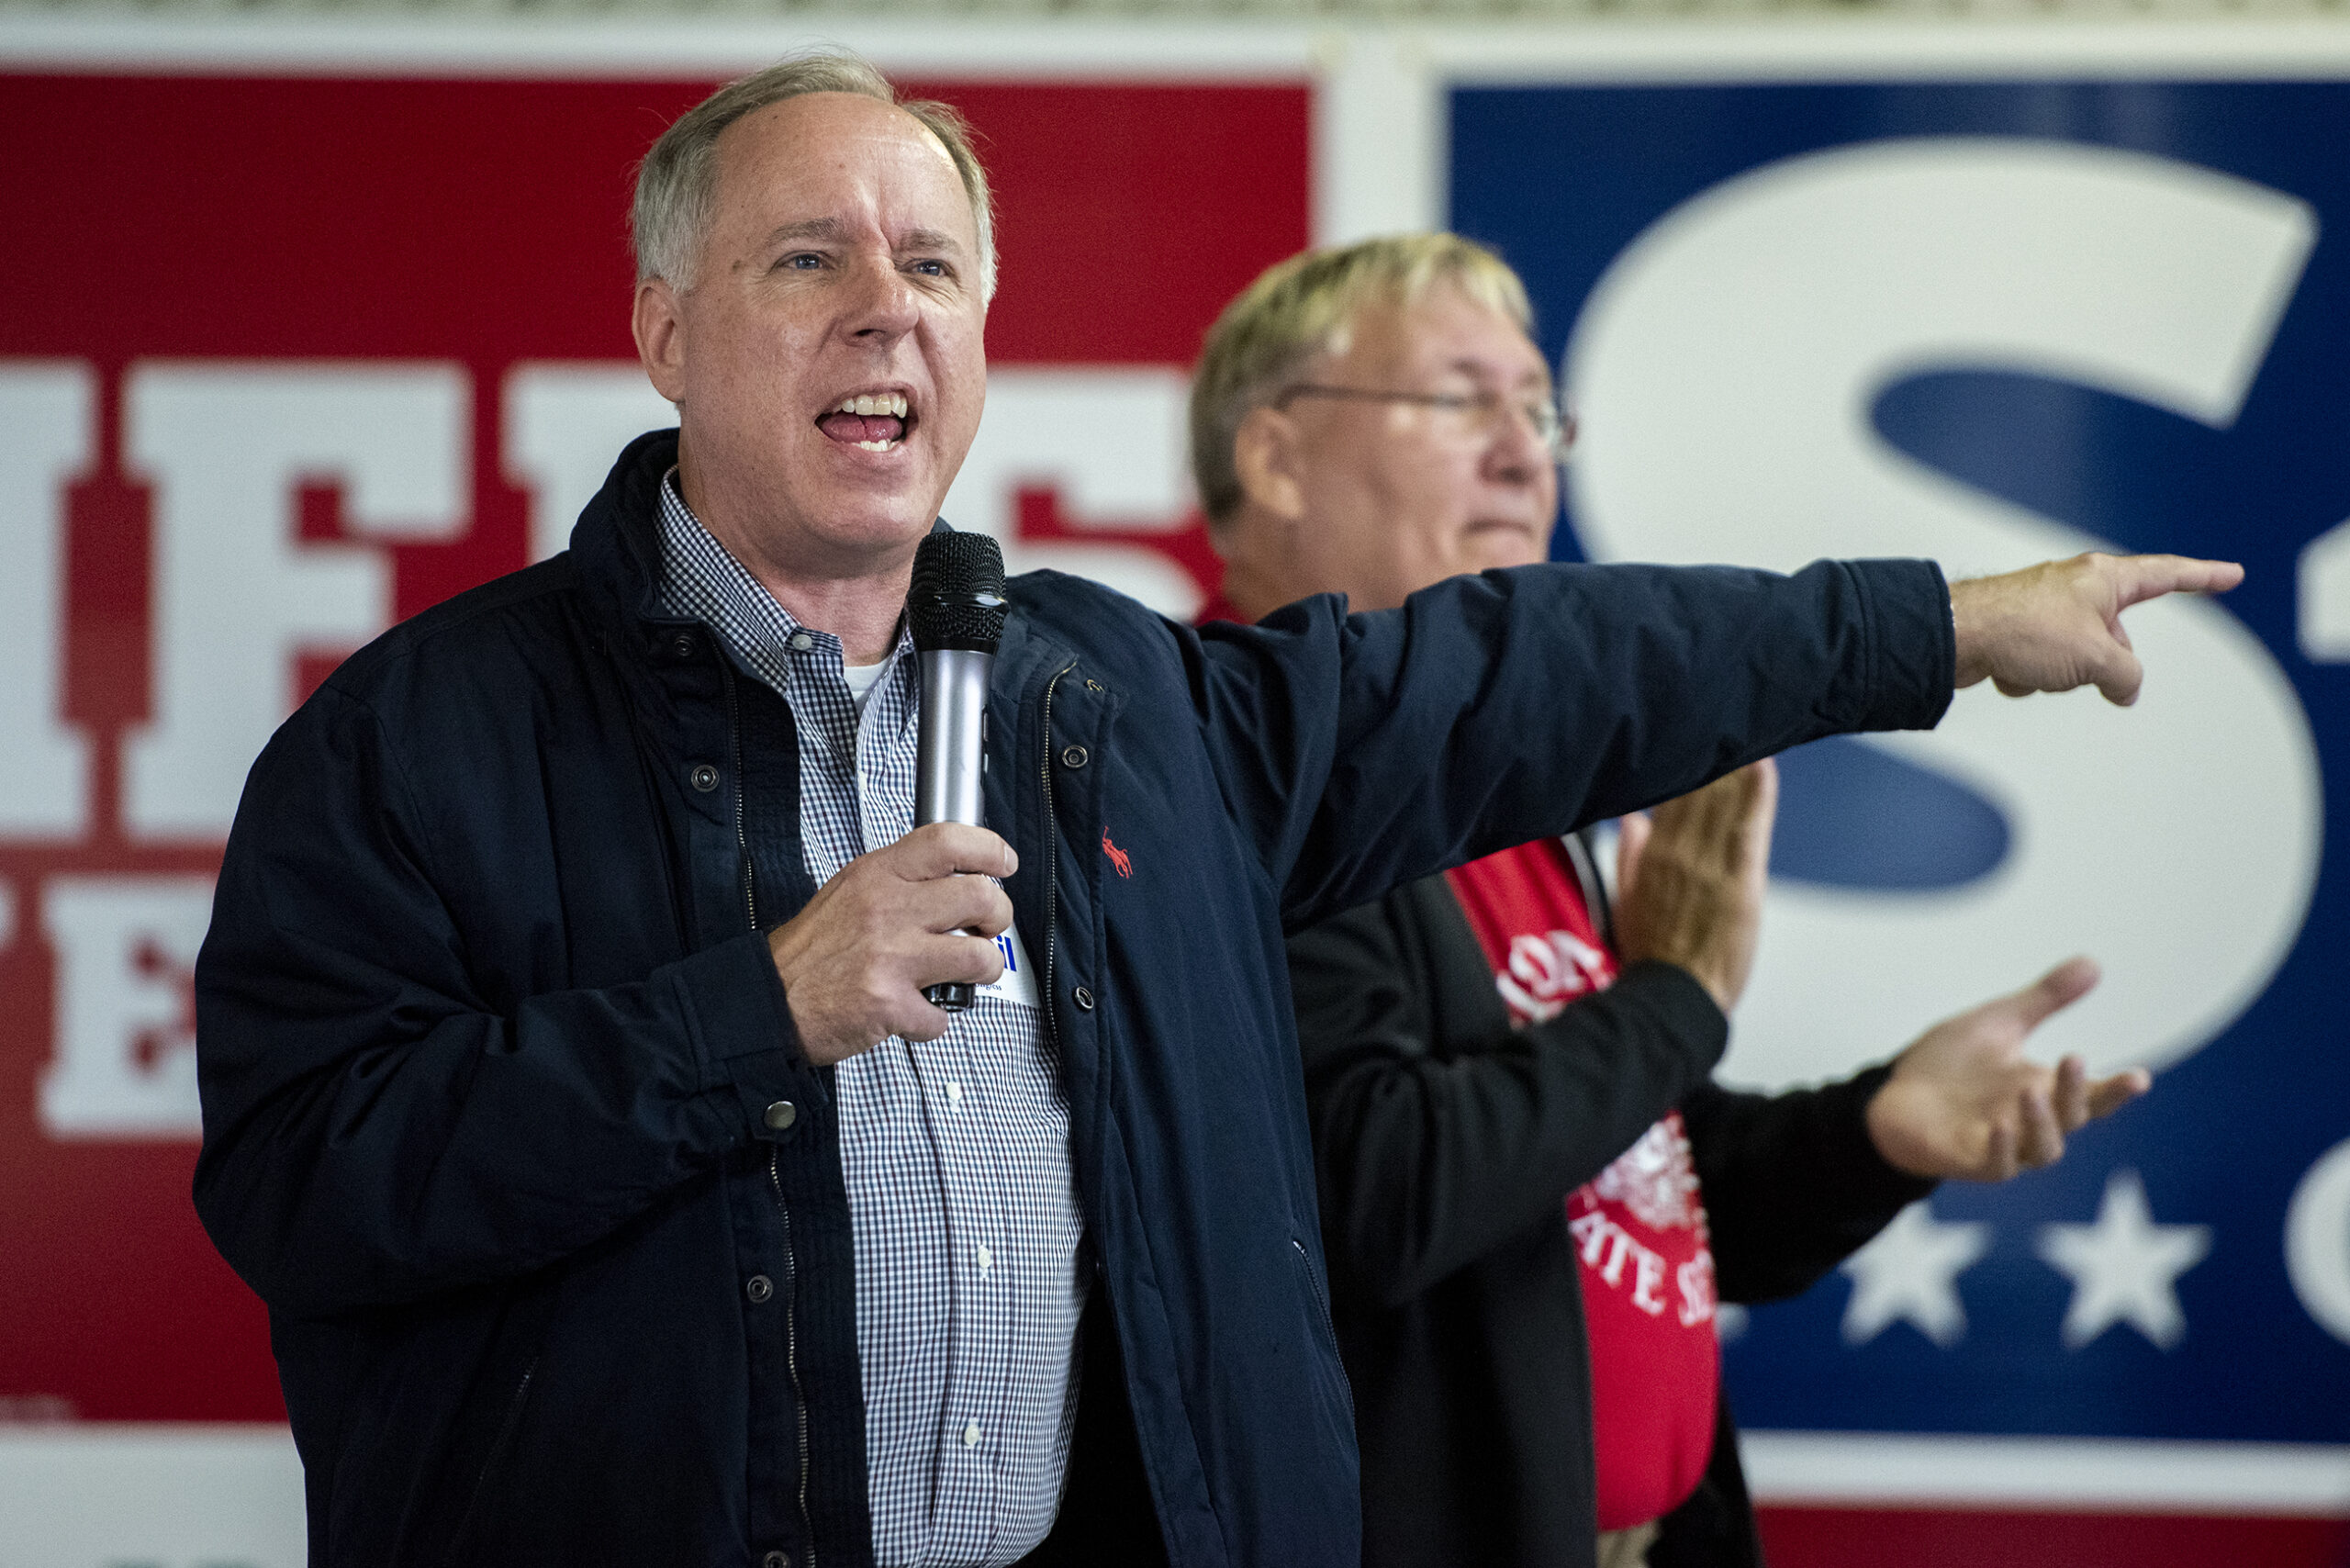 Assembly Speaker Robin Vos uses his hand to point to the side while speaking into a microphone.